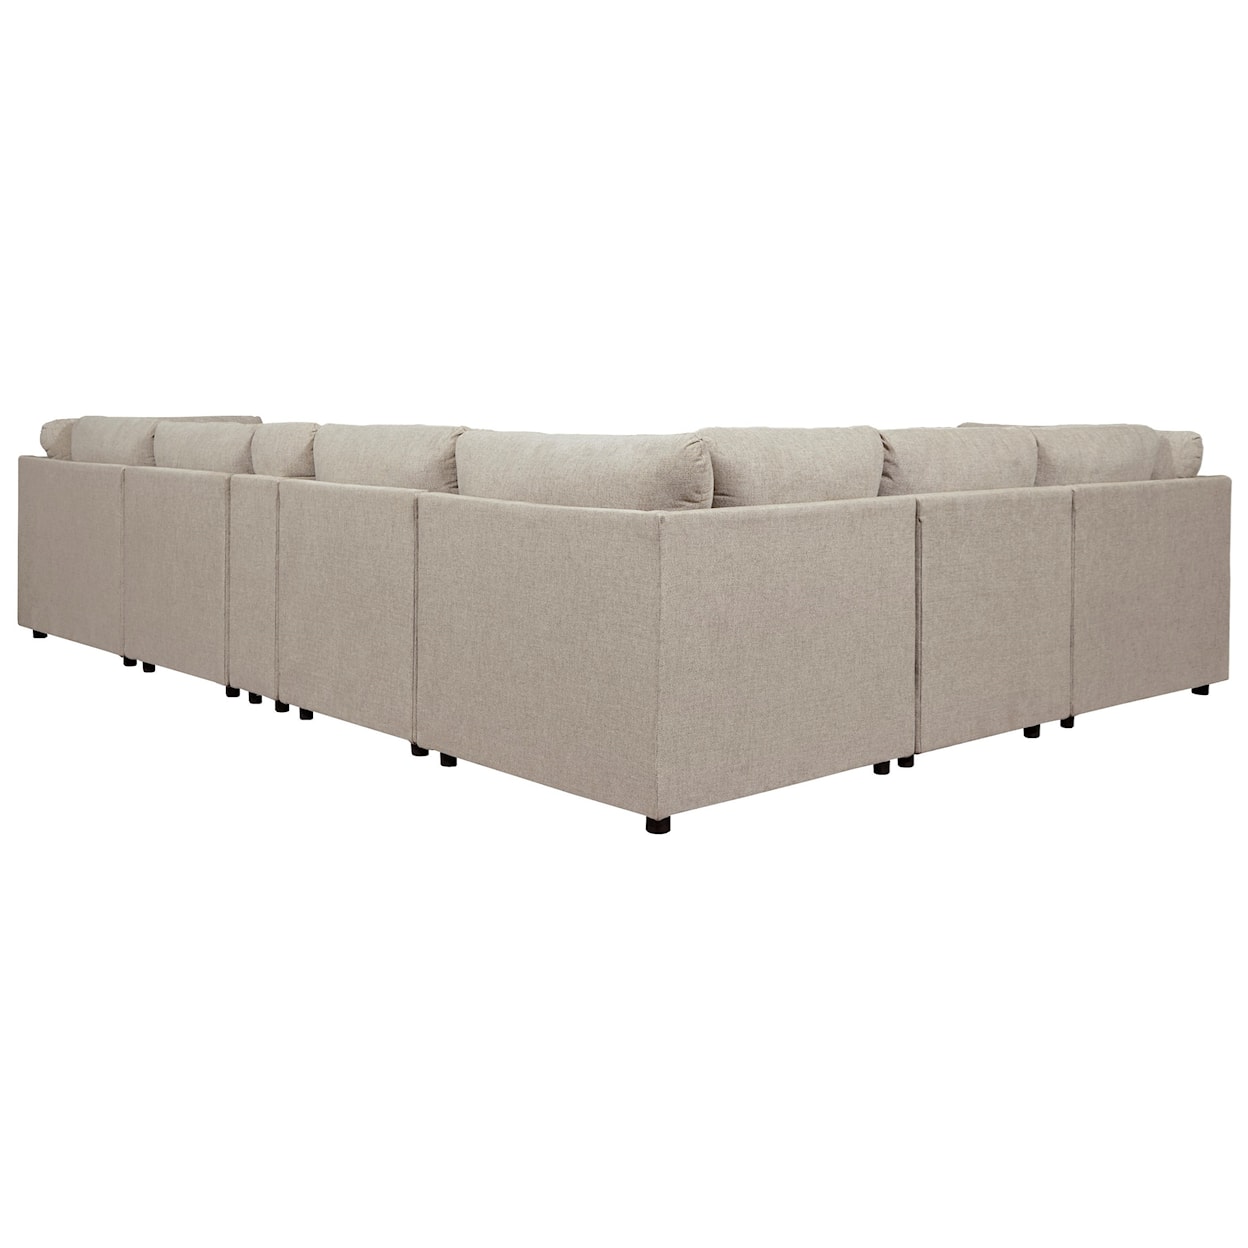 Signature Design by Ashley Kellway 7-Piece Sectional